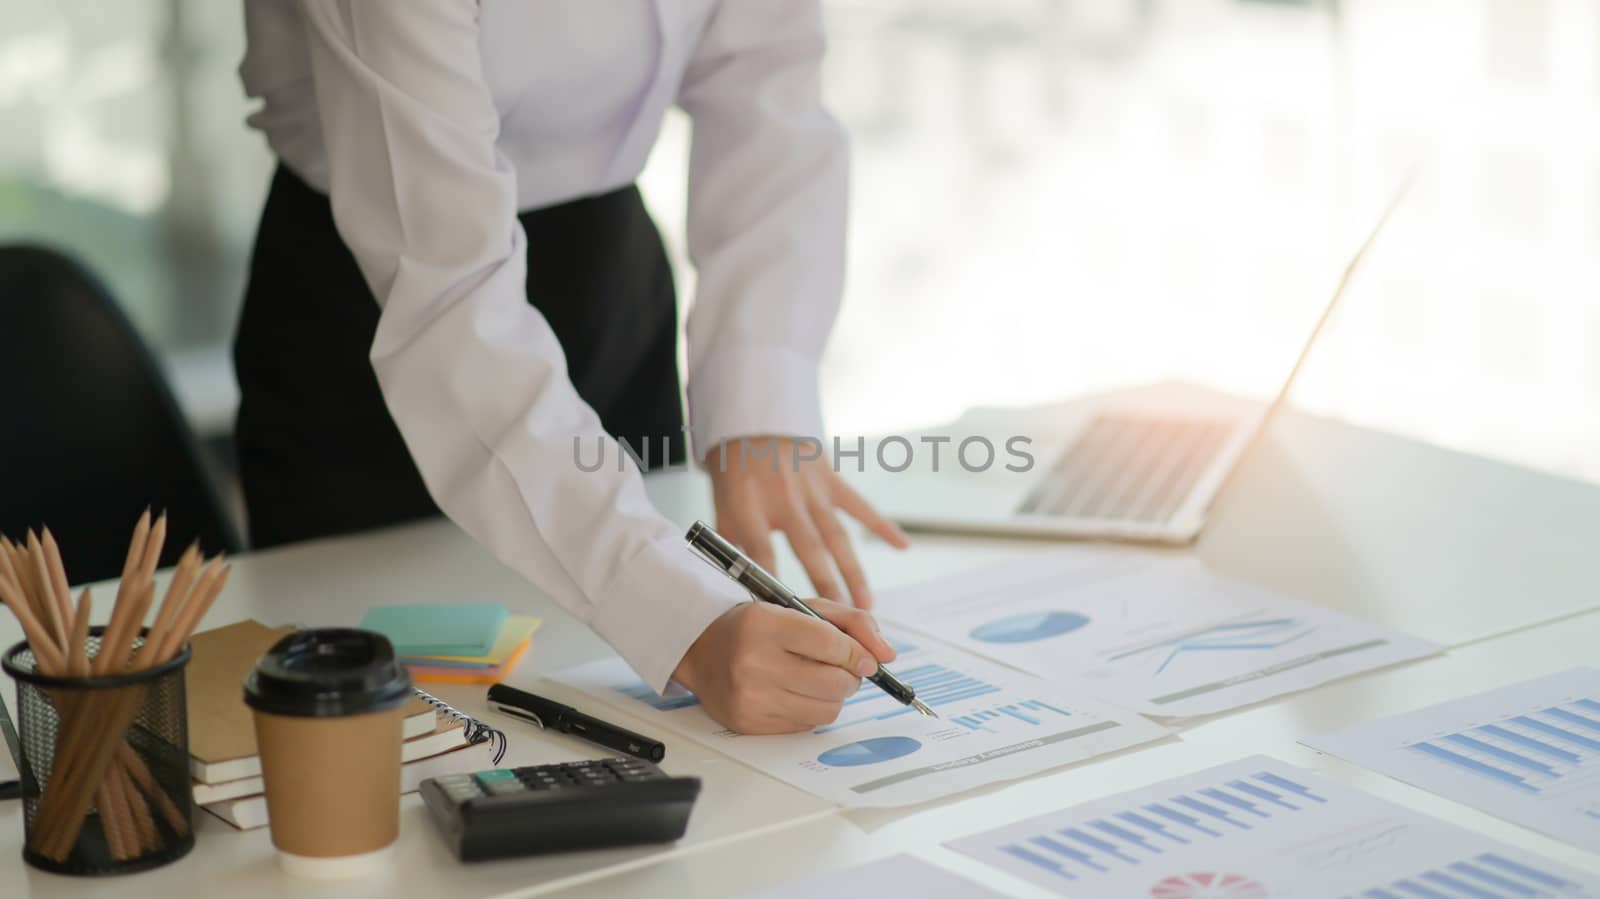 The auditor is analyzing the data graph of the organization in a modern office.